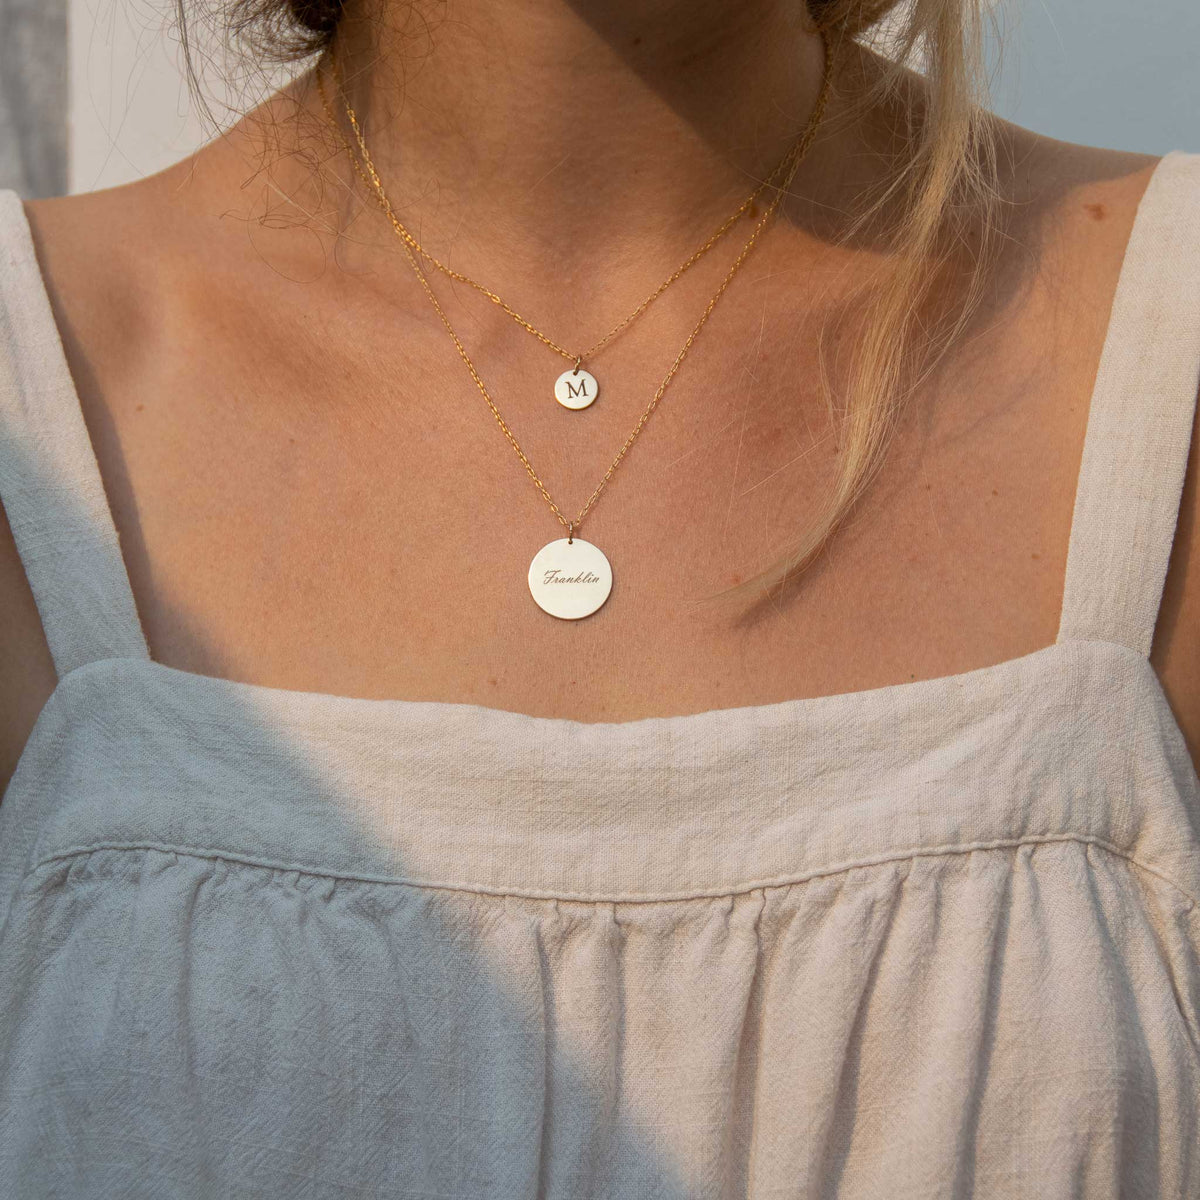 A woman wearing a small 10mm circle necklace with M engraved, and the 19mm circle necklace layered below on a longer chain with Franklin engraved. 